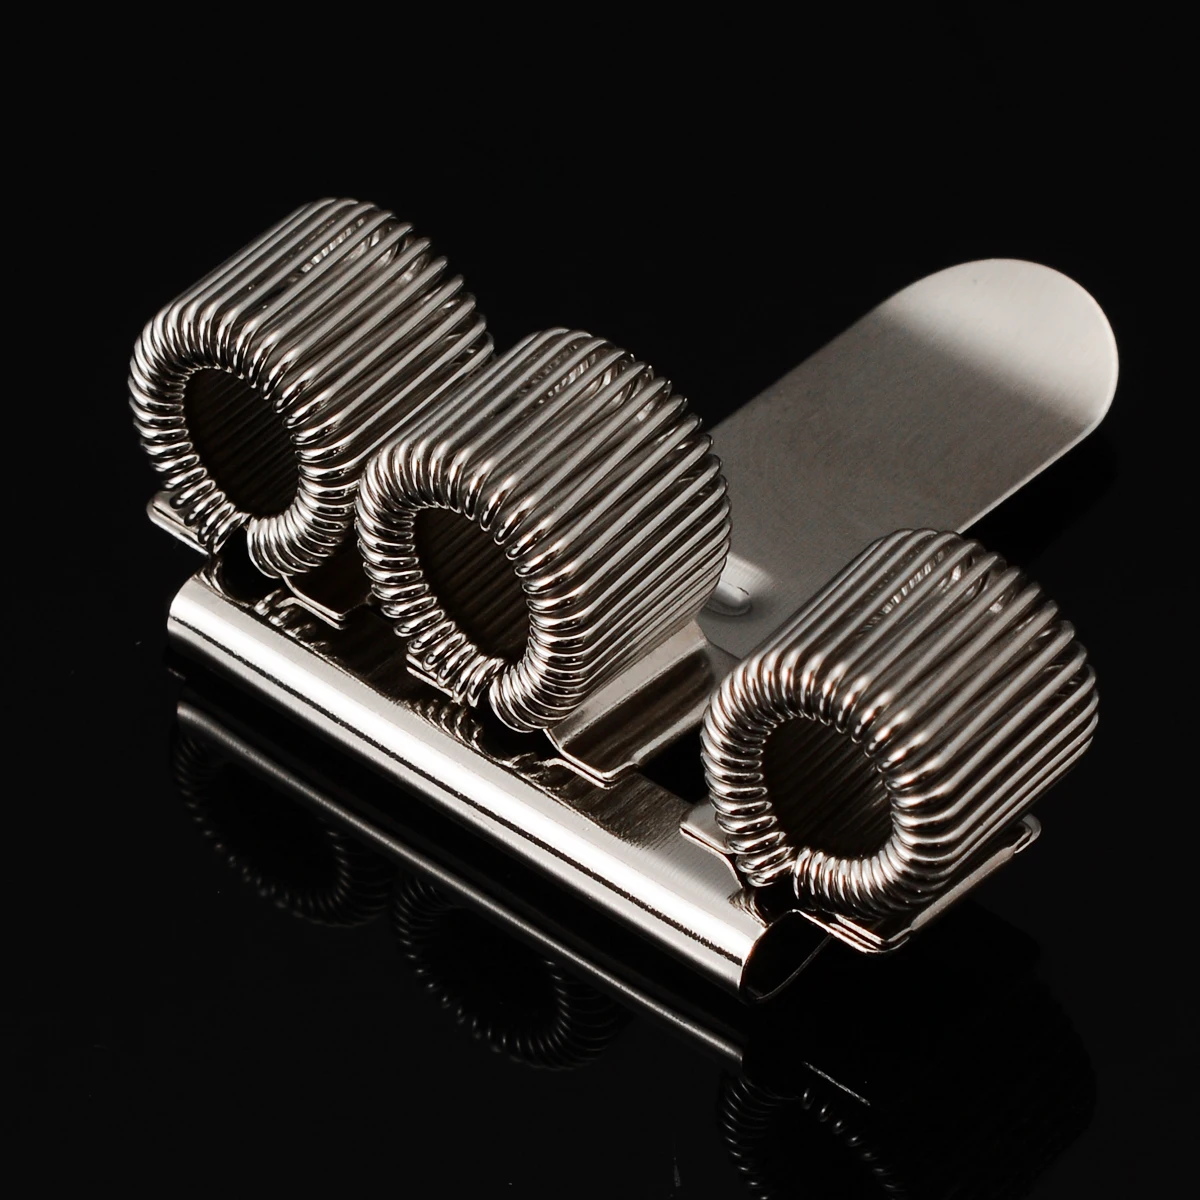 1pcs Triple Hole Metal Pen Holder with Pocket Clip for Security Nurse Ambulance Tool Office School Supplies Sationery